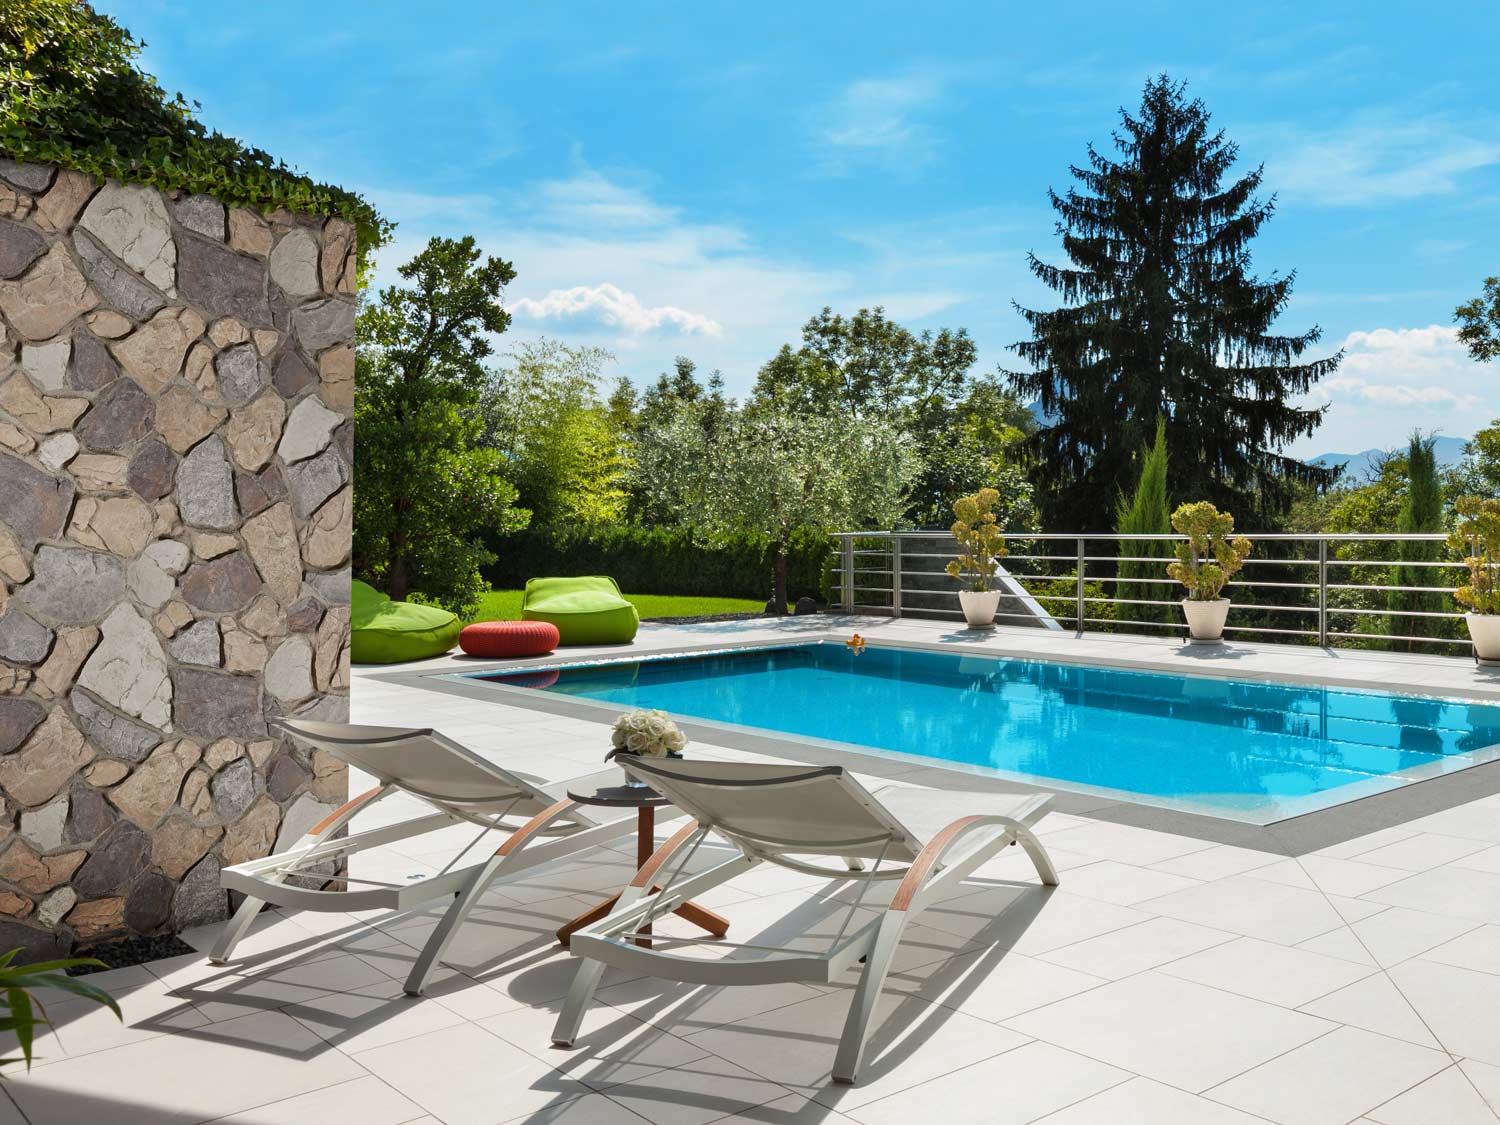 Anson fieldstone creating a relaxing outdoor pool area aesthetic